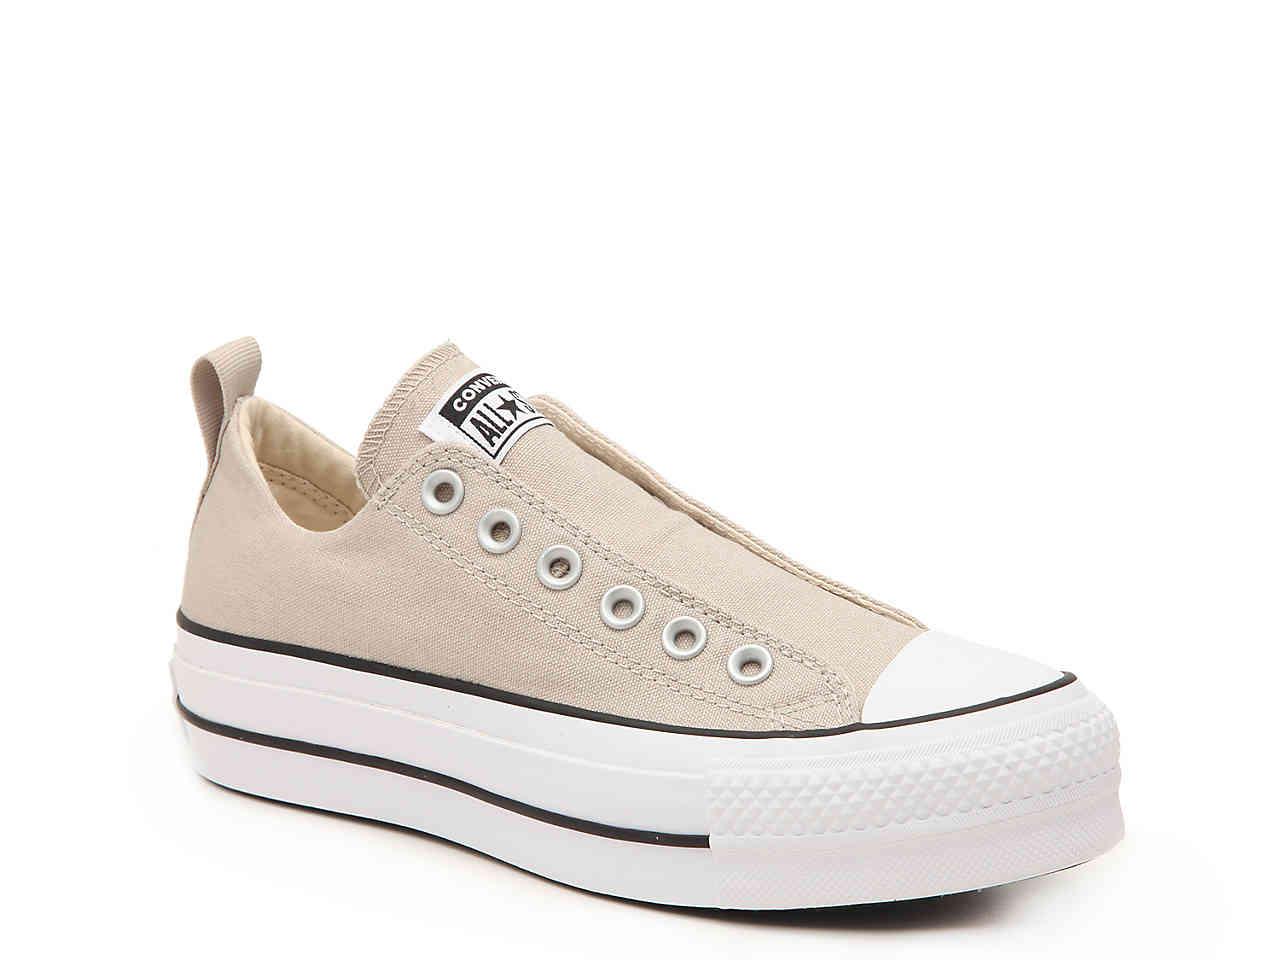 Hechting Ban Verwaarlozing Converse Chuck Taylor All Star Fashion Lift Platform Slip-on Sneaker in  Natural | Lyst